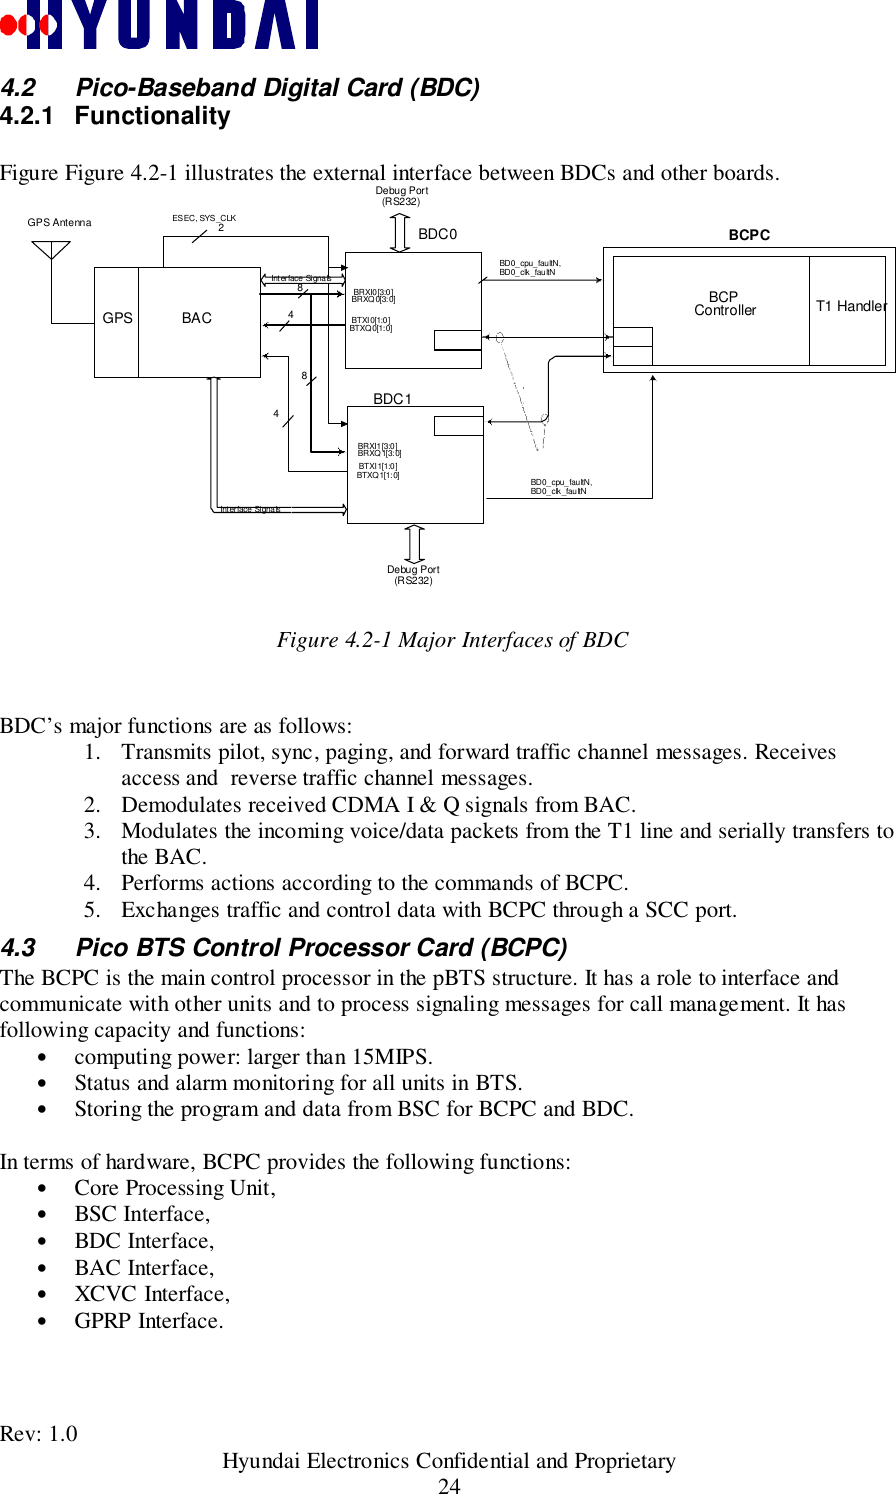 Rev: 1.0                                           Hyundai Electronics Confidential and Proprietary244.2  Pico-Baseband Digital Card (BDC)4.2.1 FunctionalityFigure Figure 4.2-1 illustrates the external interface between BDCs and other boards.BAC82ESEC, SYS_CLKBRXI0[3:0]BRXQ0[3:0]8Debug Por t(RS232)GPS Antenna BDC0BDC1Debug Por t(RS232)4BTXI 0[1:0]BTXQ 0[1: 0]Int erface Signa lsInt erface Signa lsBCPController T1 Handler4GPSBCPCBRXI1[3:0]BRXQ 1[3: 0]BTXI 1[1:0 ]BTXQ 1[1: 0]BD0_ cpu_faultN,BD0_clk_faultNBD0_ cpu_faultN,BD0_clk_faultN Figure 4.2-1 Major Interfaces of BDCBDC’s major functions are as follows:1. Transmits pilot, sync, paging, and forward traffic channel messages. Receivesaccess and  reverse traffic channel messages.2. Demodulates received CDMA I &amp; Q signals from BAC.3. Modulates the incoming voice/data packets from the T1 line and serially transfers tothe BAC.4. Performs actions according to the commands of BCPC.5. Exchanges traffic and control data with BCPC through a SCC port.4.3  Pico BTS Control Processor Card (BCPC)The BCPC is the main control processor in the pBTS structure. It has a role to interface andcommunicate with other units and to process signaling messages for call management. It hasfollowing capacity and functions:• computing power: larger than 15MIPS.• Status and alarm monitoring for all units in BTS.• Storing the program and data from BSC for BCPC and BDC.In terms of hardware, BCPC provides the following functions:• Core Processing Unit,• BSC Interface,• BDC Interface,• BAC Interface,• XCVC Interface,• GPRP Interface.